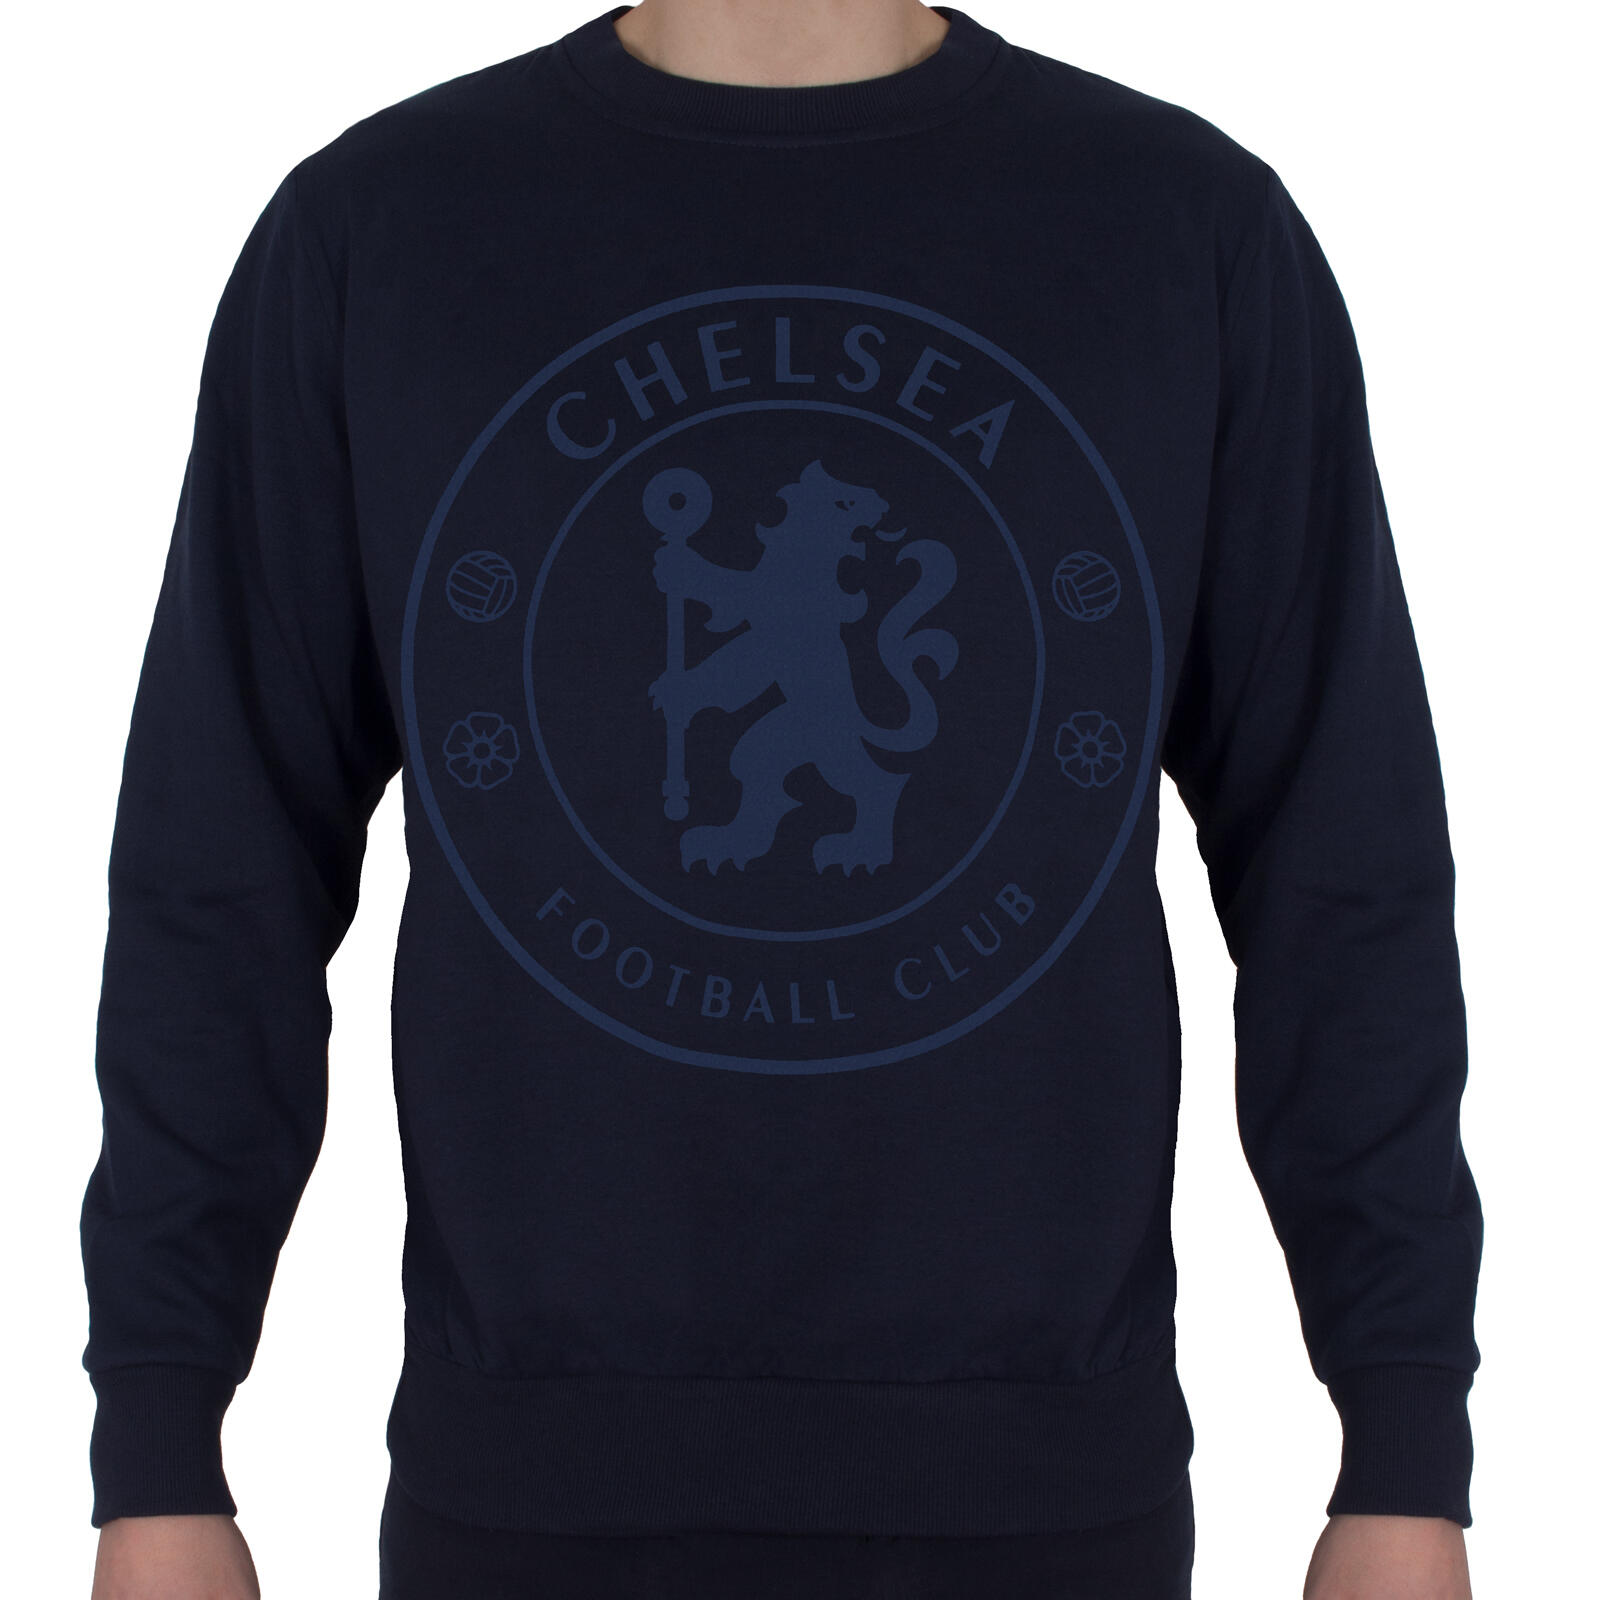 Chelsea FC Boys Sweatshirt Graphic Top Kids OFFICIAL Football Gift 1/3